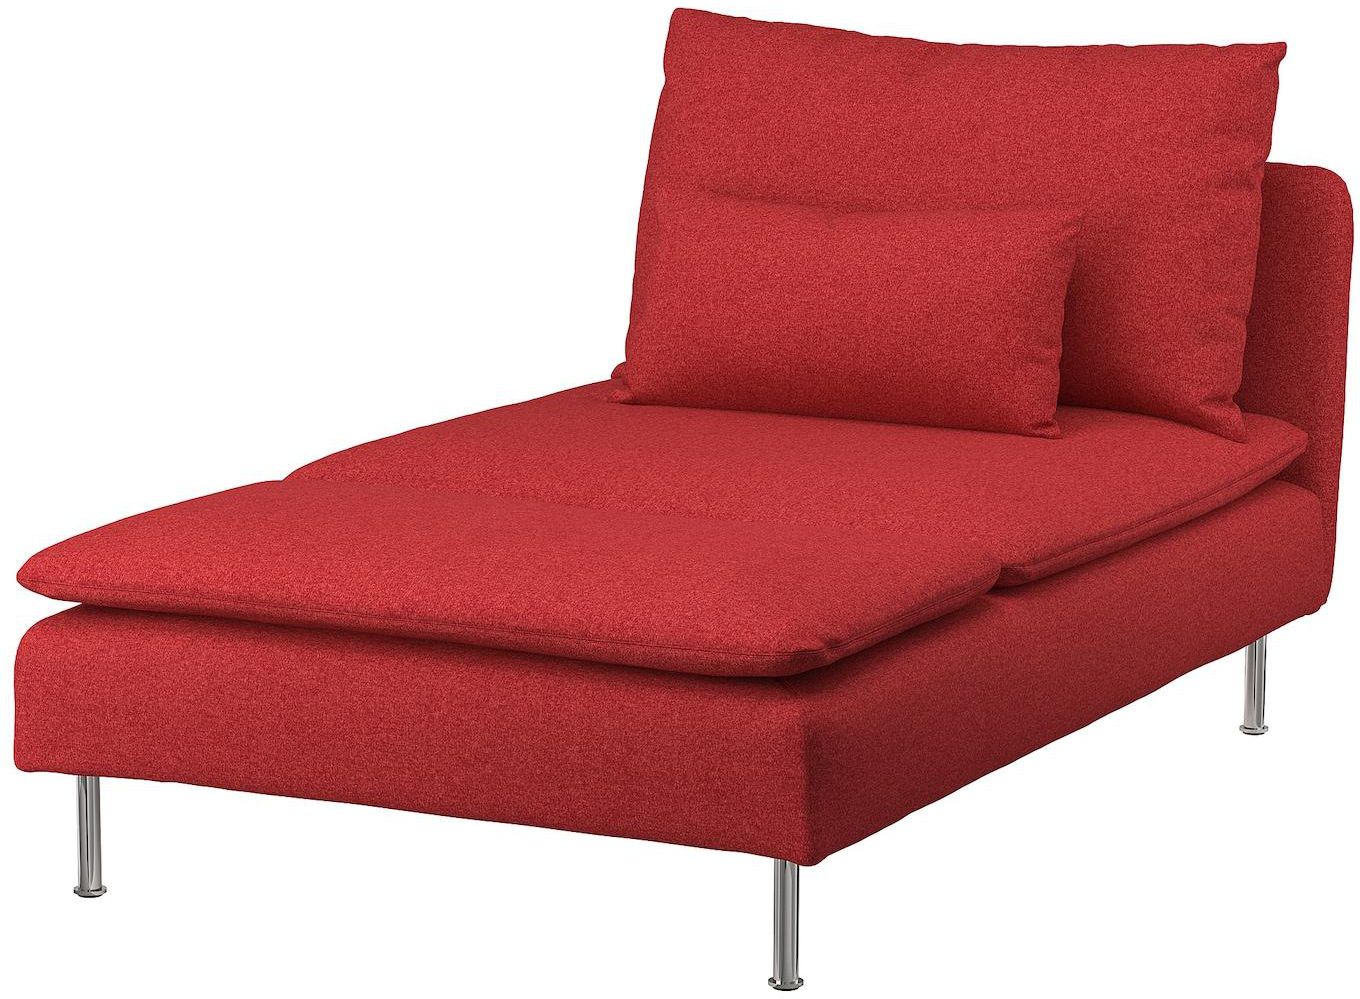 SÖDERHAMN Cover for chaise longue - Tonerud red